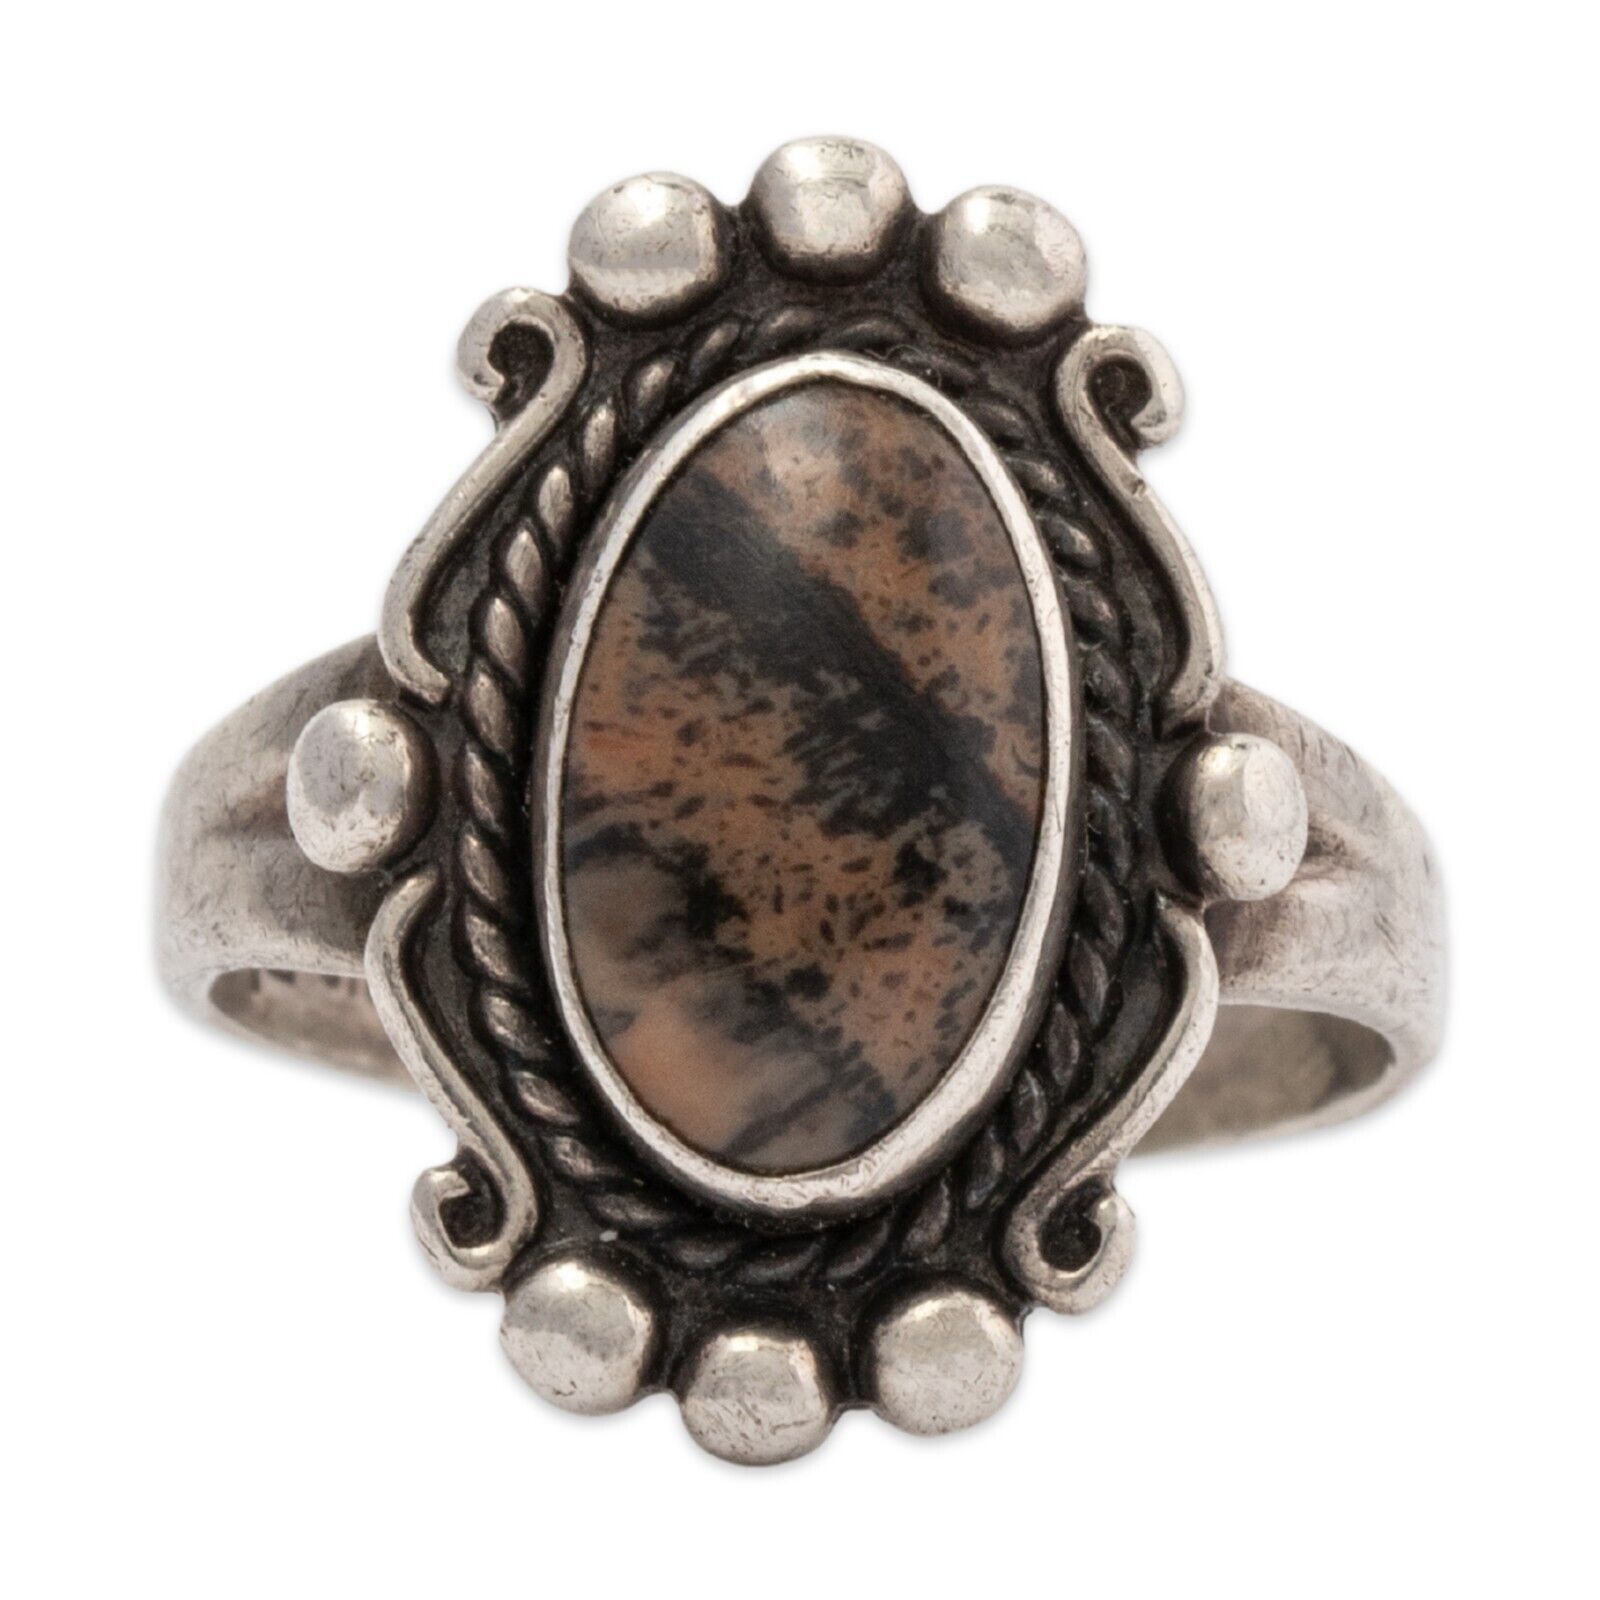 NATIVE AMERICAN BELL TRADING POST STERLING SILVER PETRIFIED WOOD RING 6.5